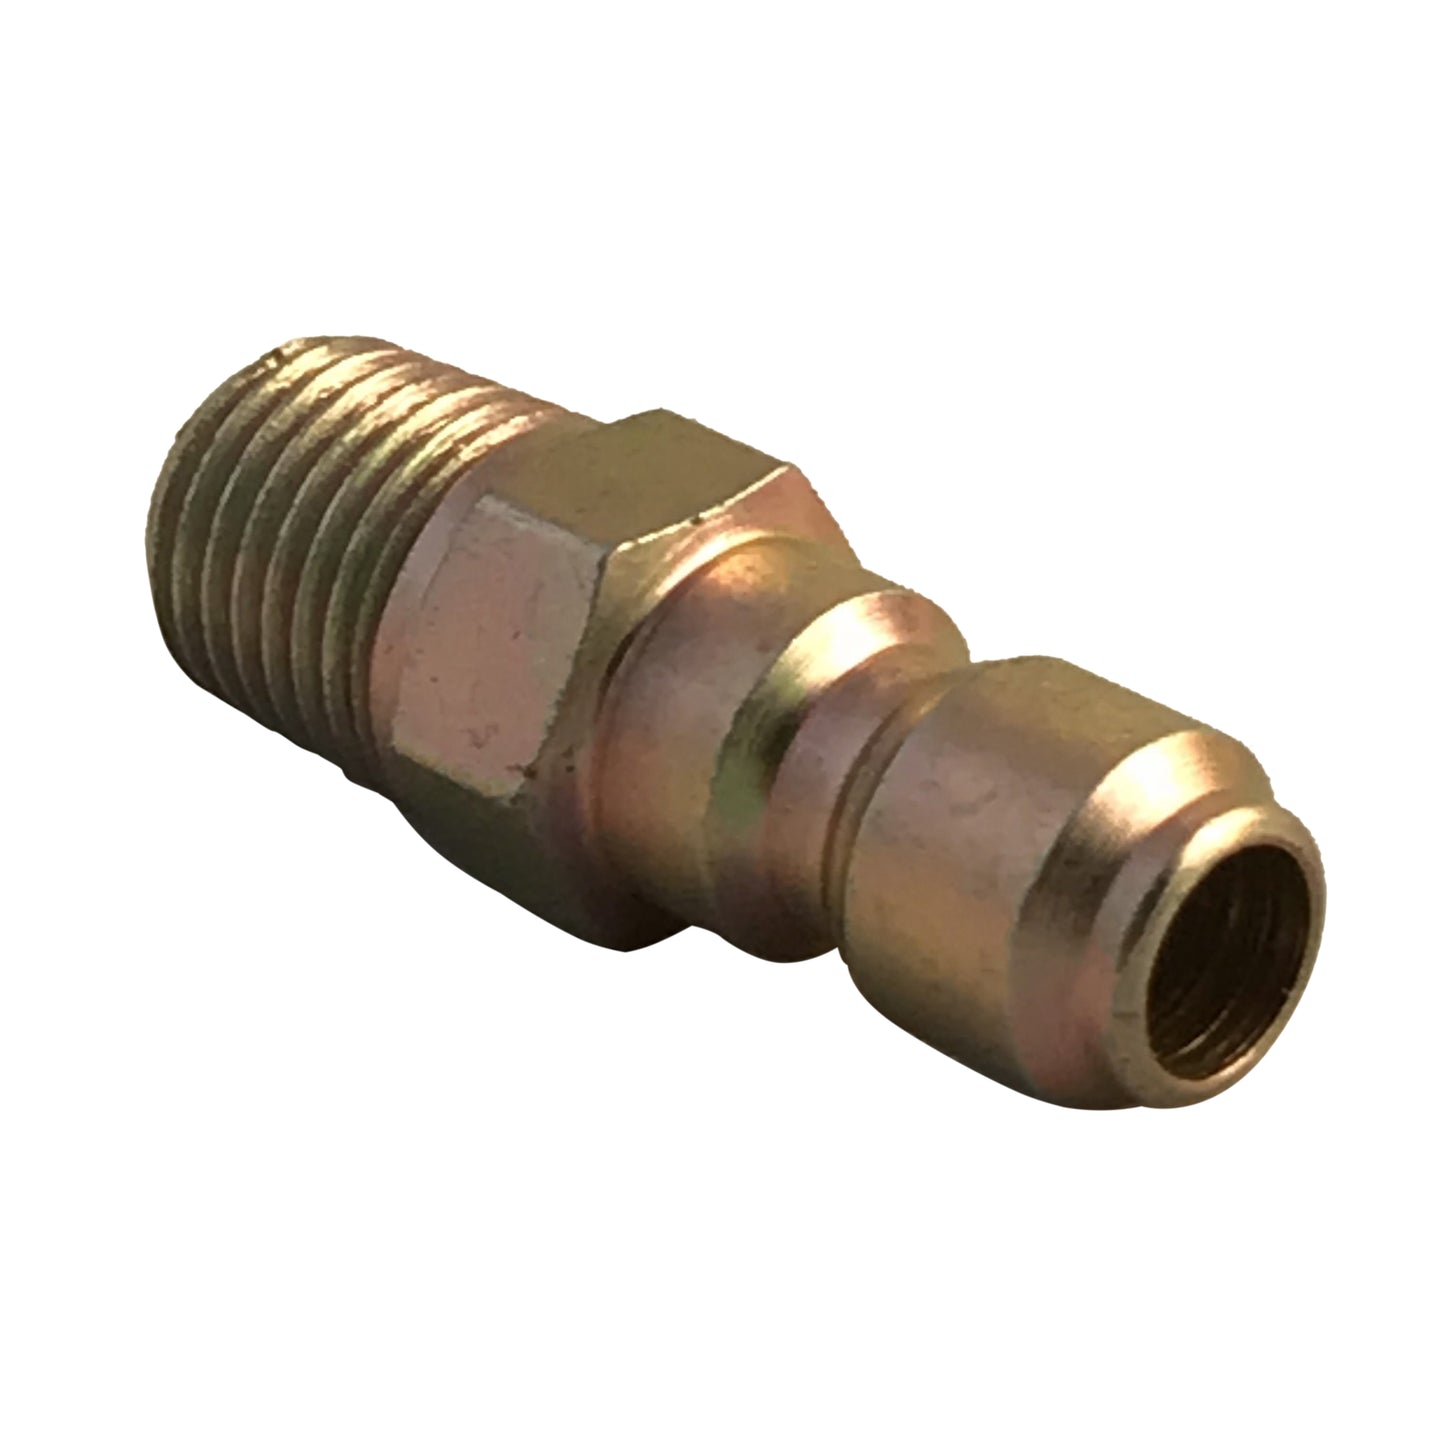 1/4" Male NPT Screw Thread to Quick Connector 1/4" Male for adding accessories to your pressure washer